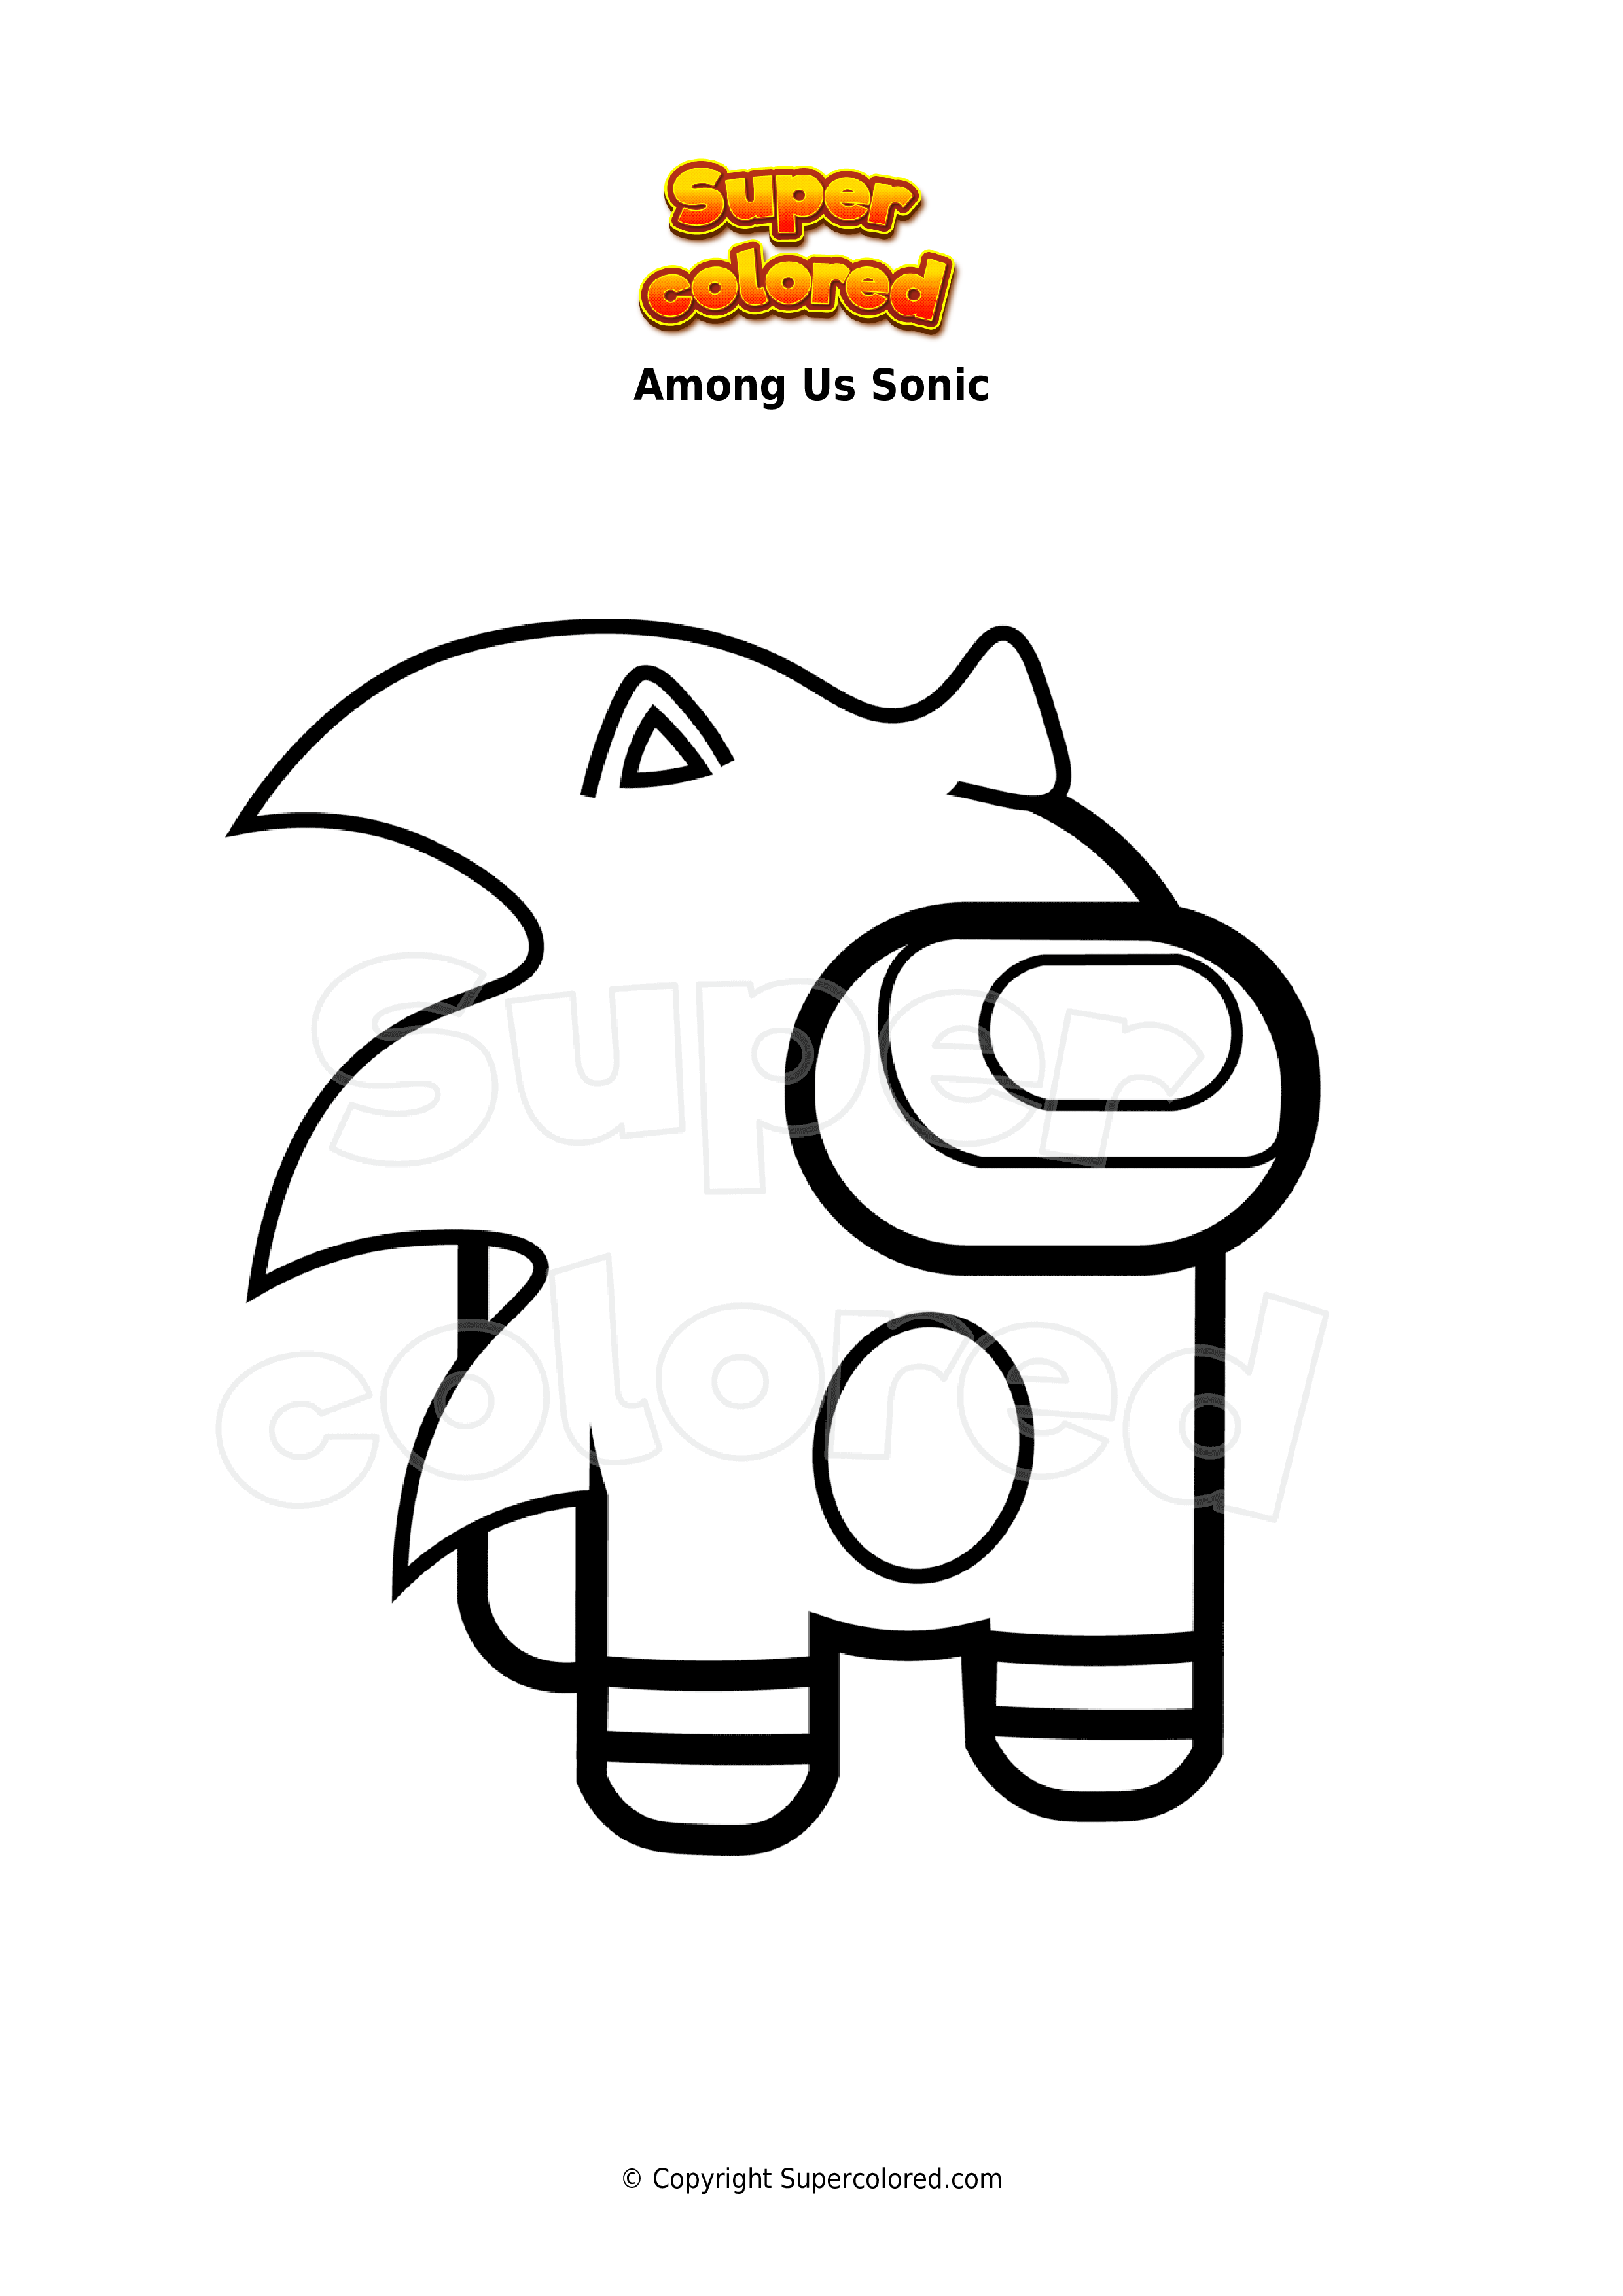 Coloring page Among Us Sonic   Supercolored.com